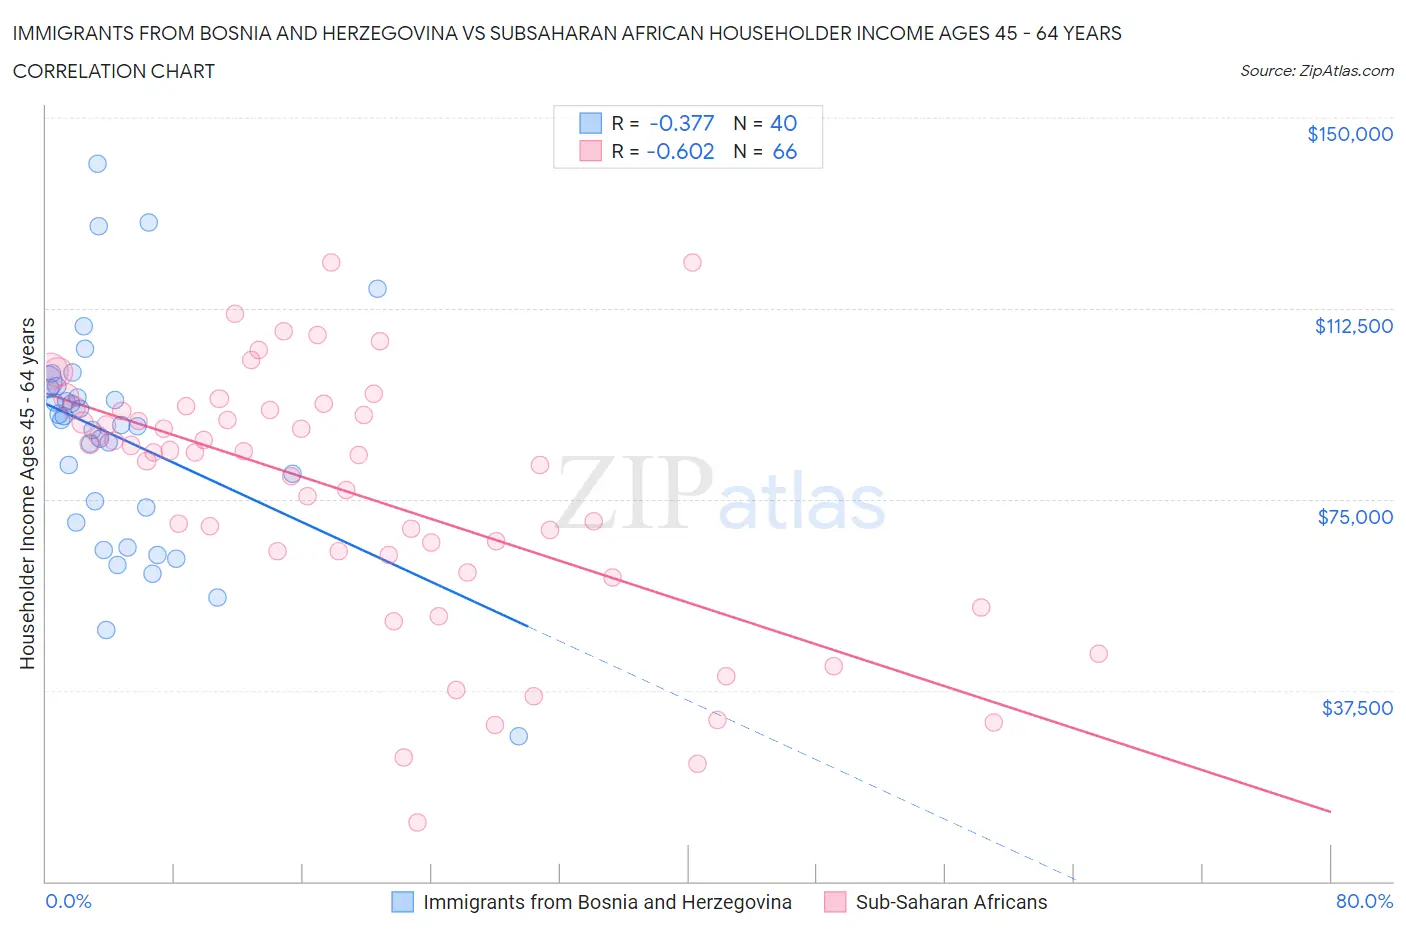 Immigrants from Bosnia and Herzegovina vs Subsaharan African Householder Income Ages 45 - 64 years